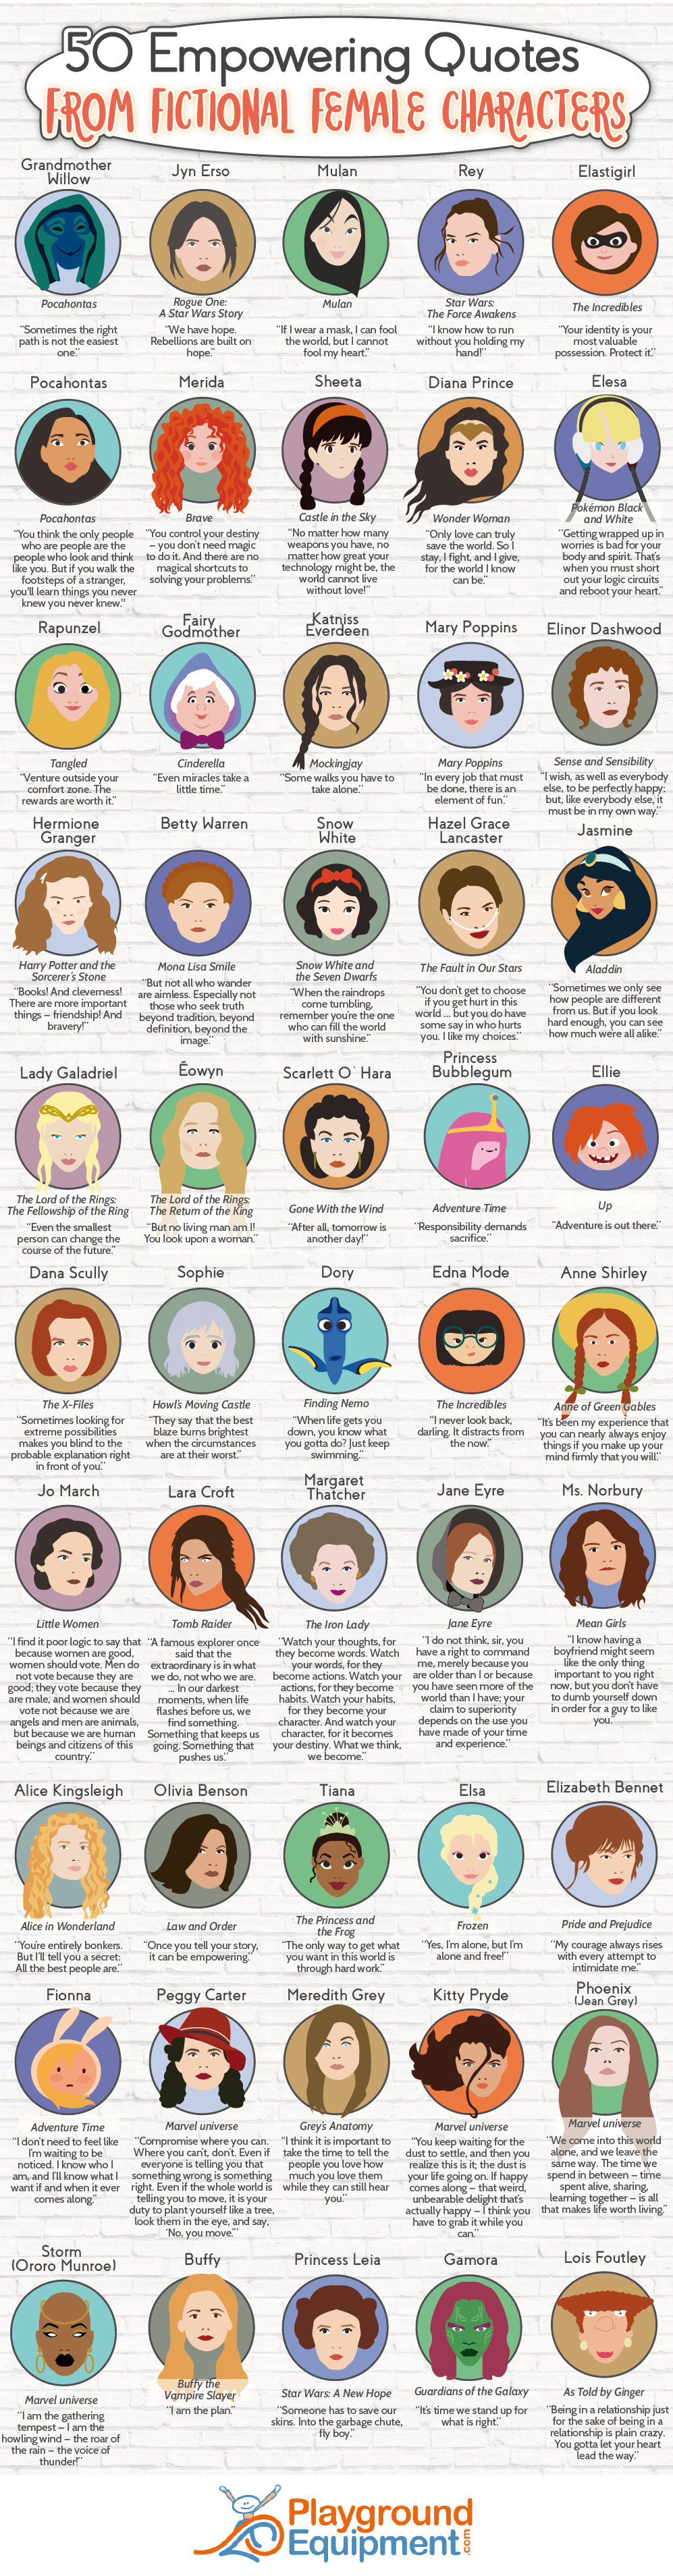 50-empowering-quotes-from-fictional-female-characters-4